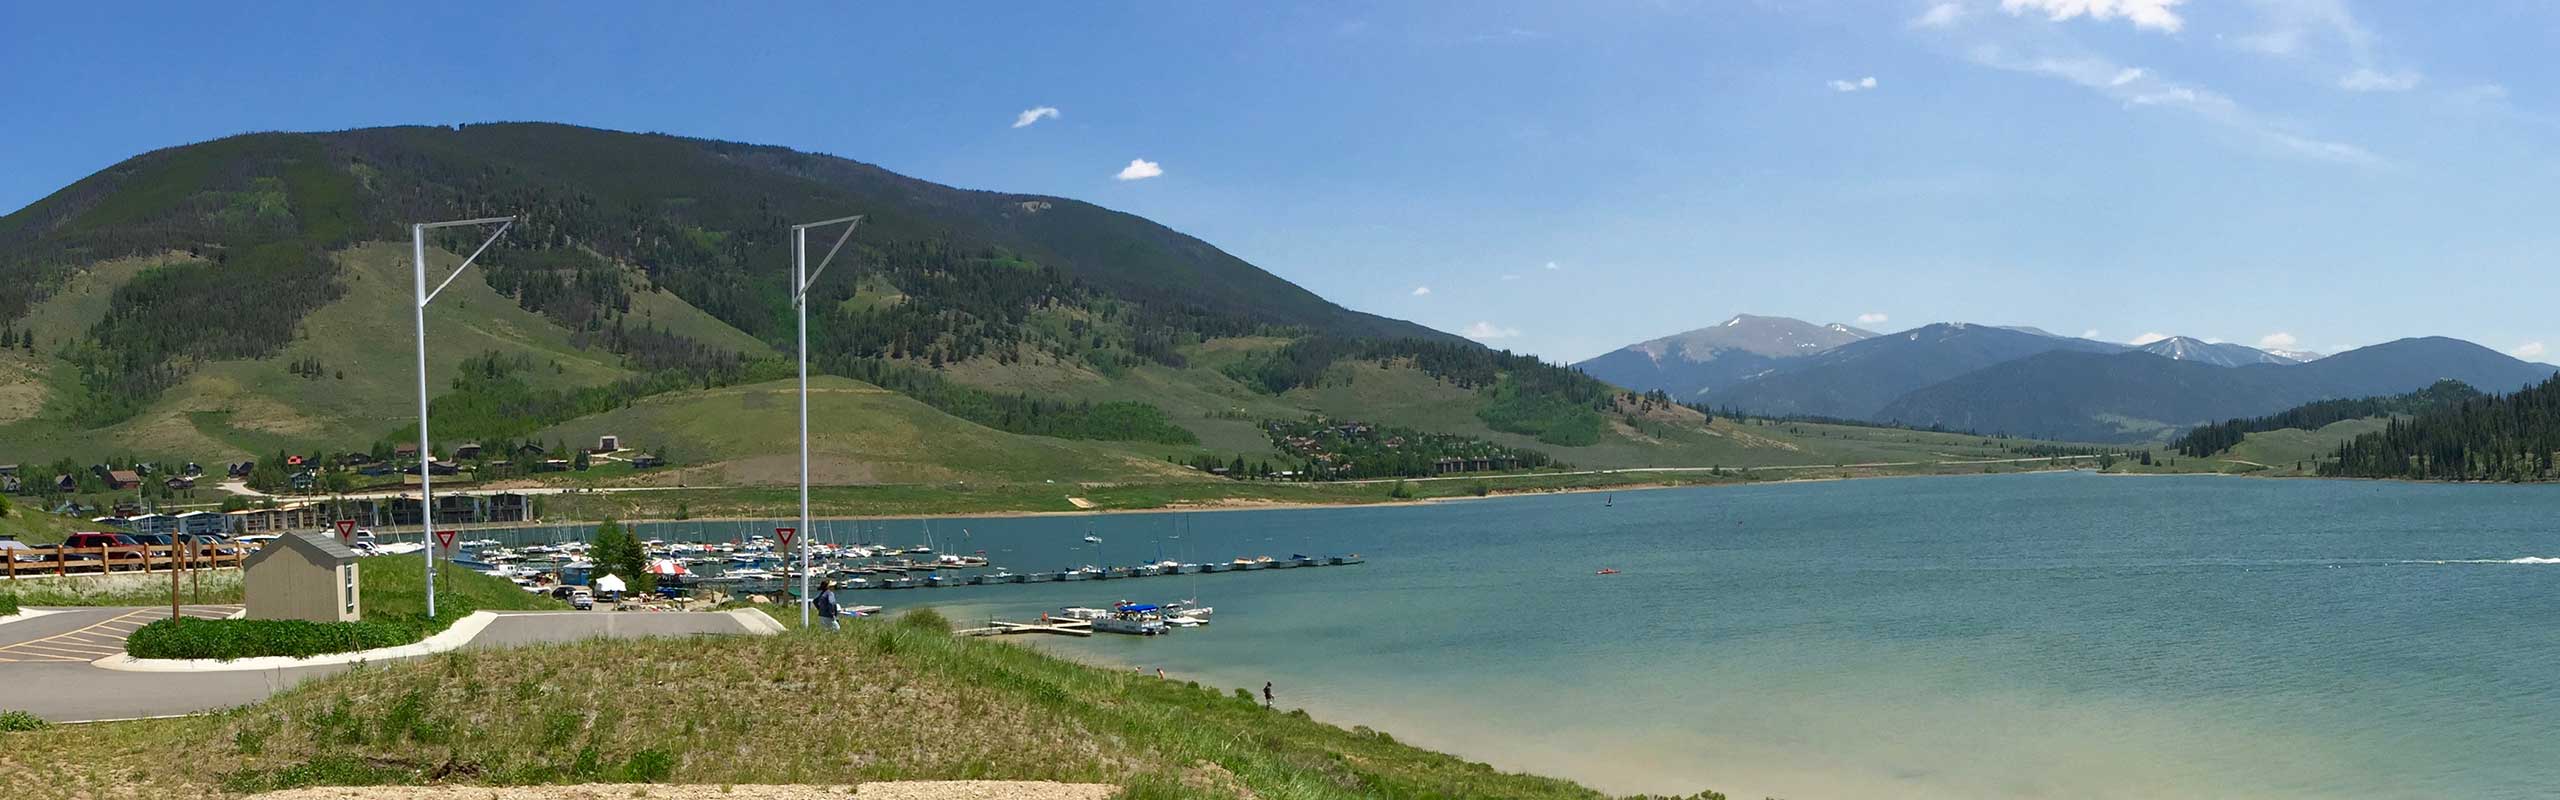 Summer in Copper Mountain, Colorado Homes for Sale, REMAX of the Summit | The Henry Barr Team2560x1600Summer in Copper Mountain, Colorado Homes for Sale, REMAX of the Summit | The Henry Barr Team2560x1600